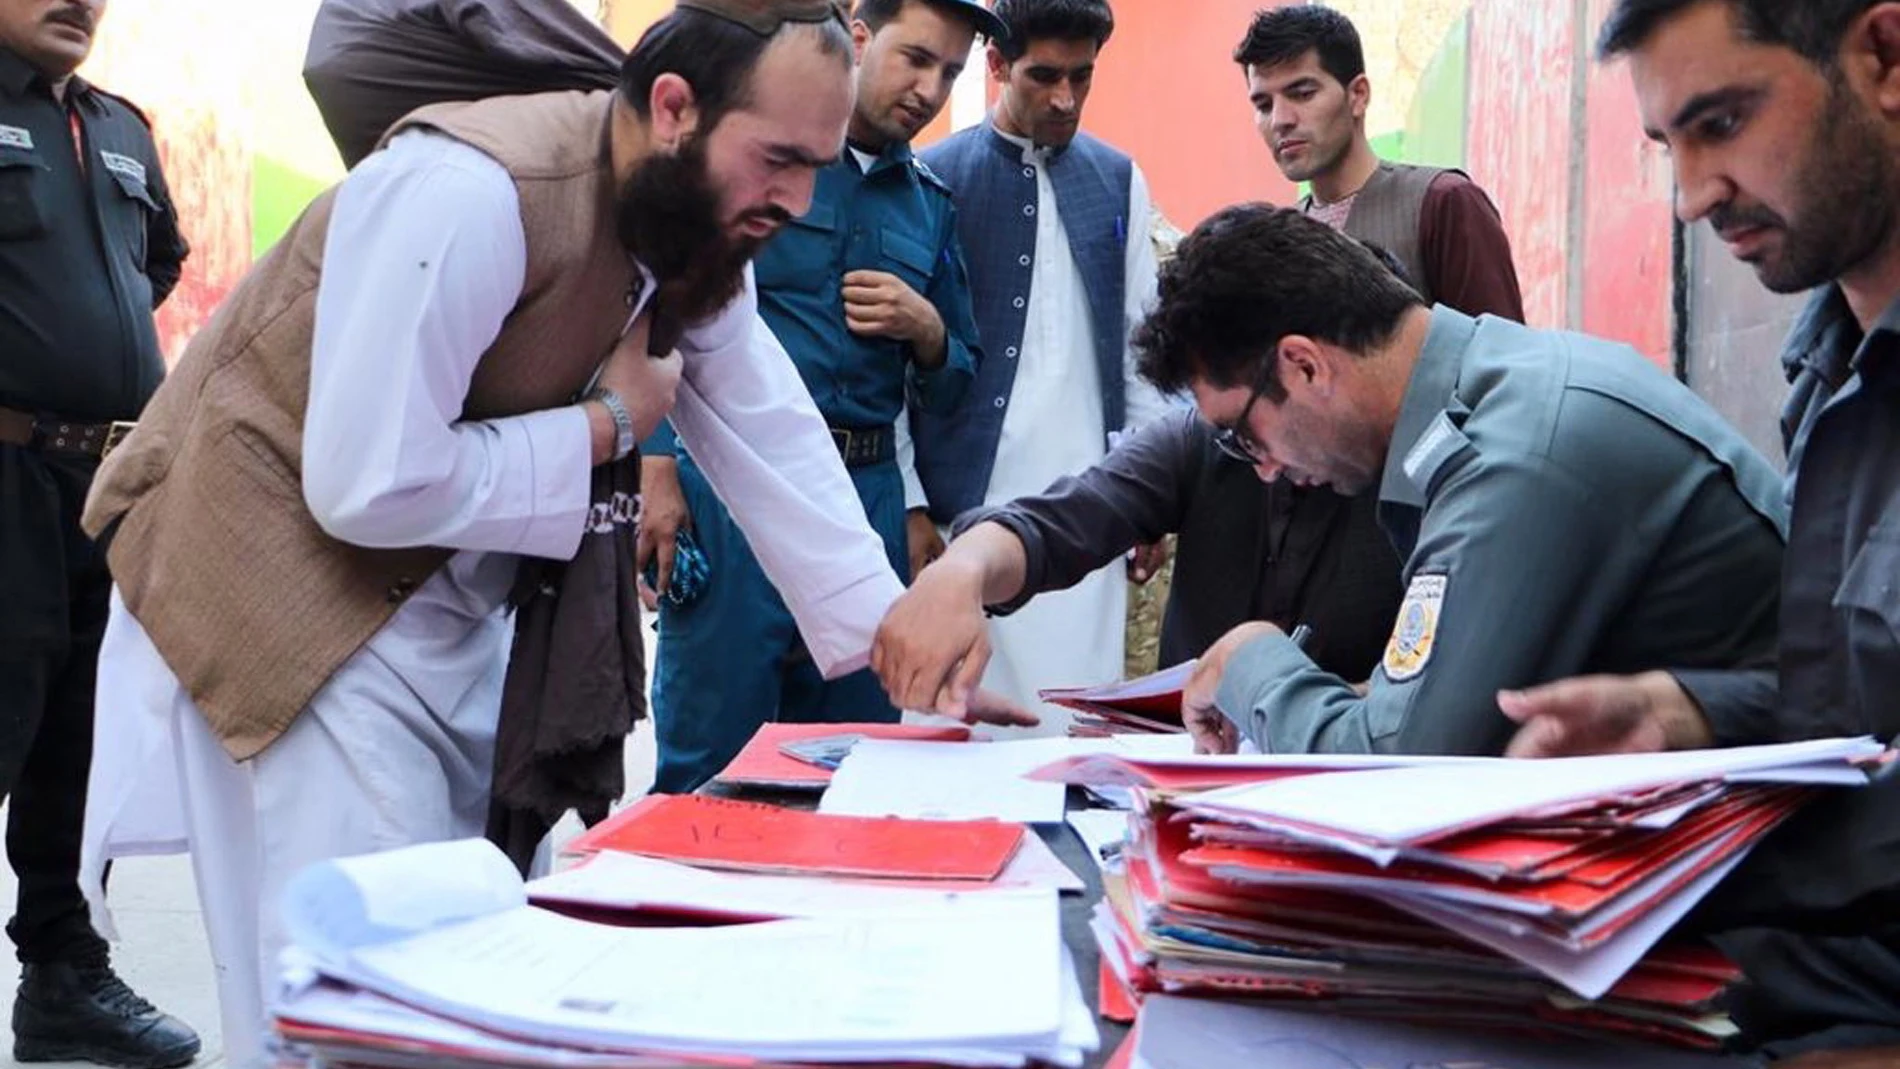 Taliban prisoners released from Kabul jail